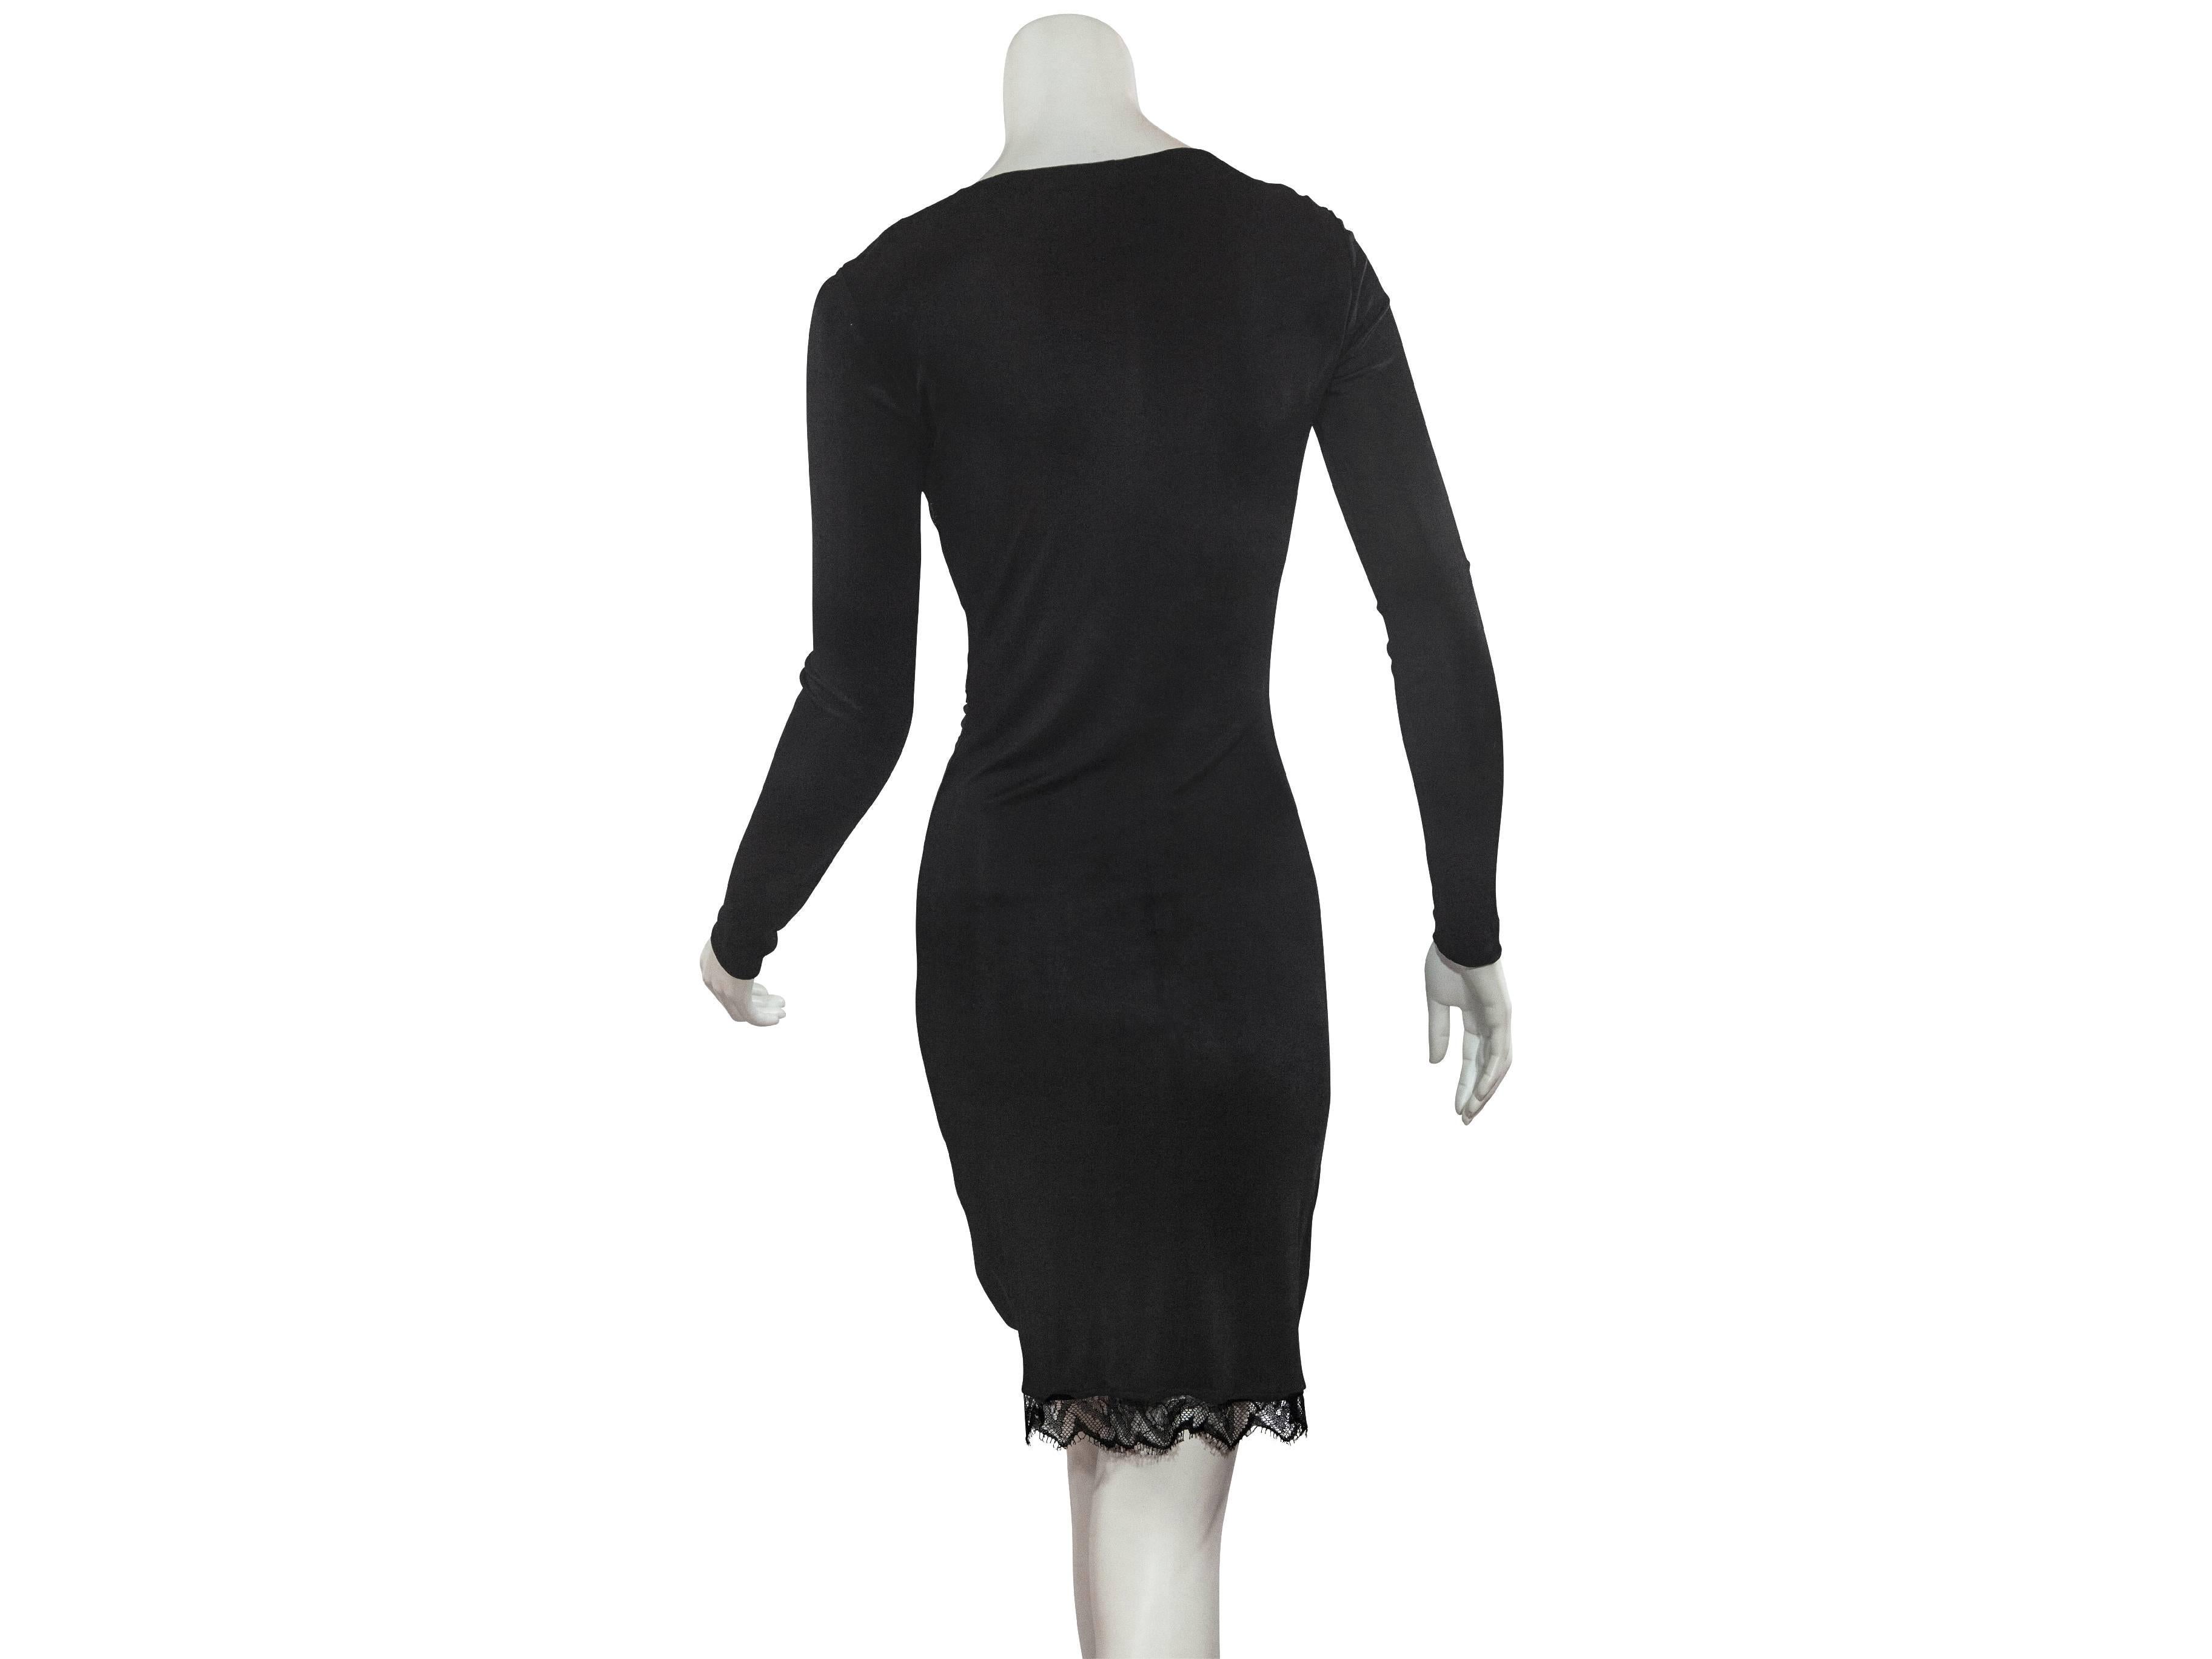 Black long-sleeve dress with flattering ruched front by Emilio Pucci.  V-neck with sheer lace inset.  Lace-trimmed hem.  Pullover style. 